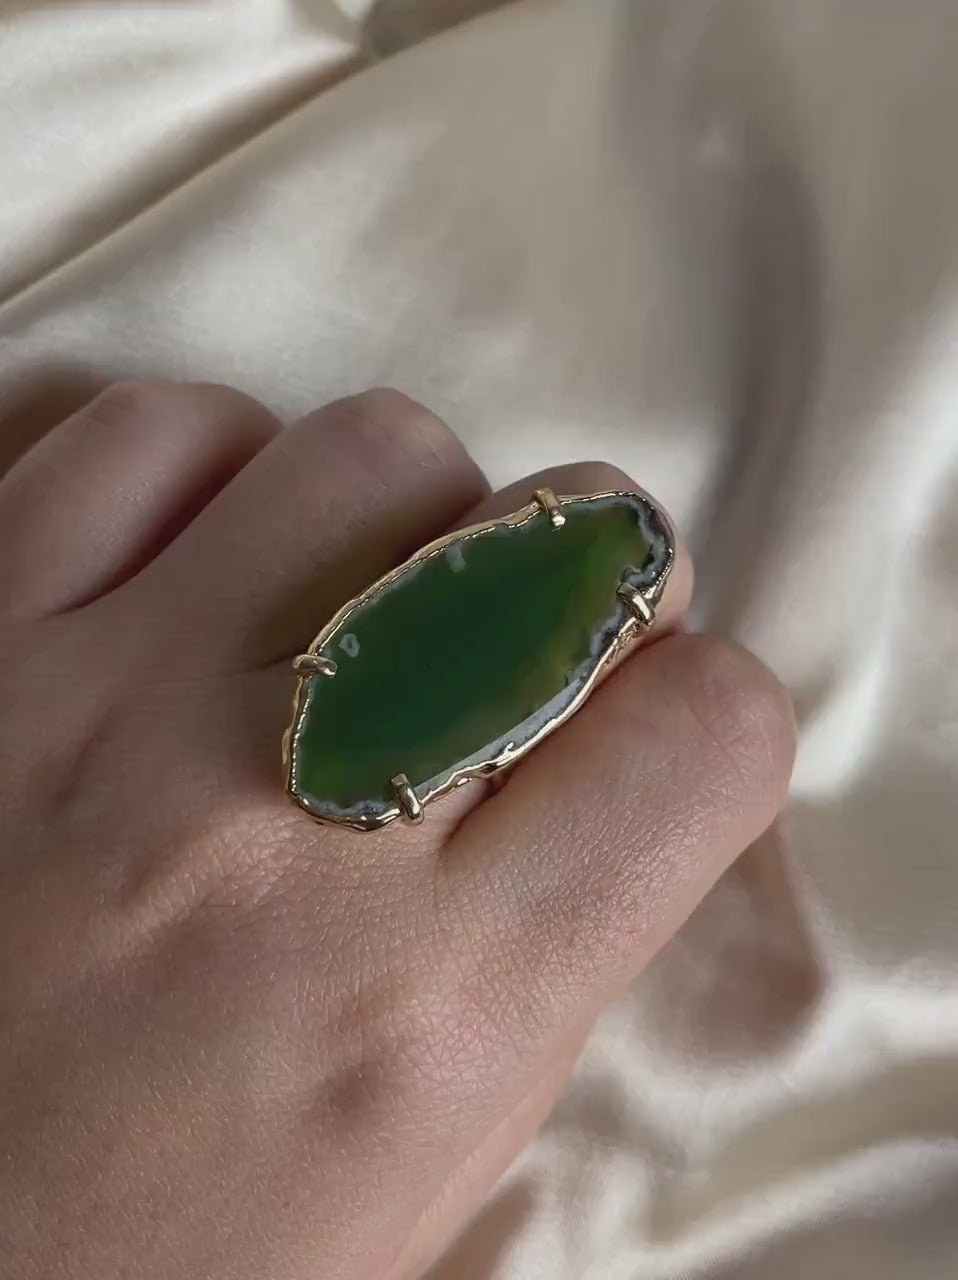 Unique Green Agate Ring Statement, Sliced Geode Ring, Boho Large Stone, Raw Crystal Ring Gold Adjustable, G15-163